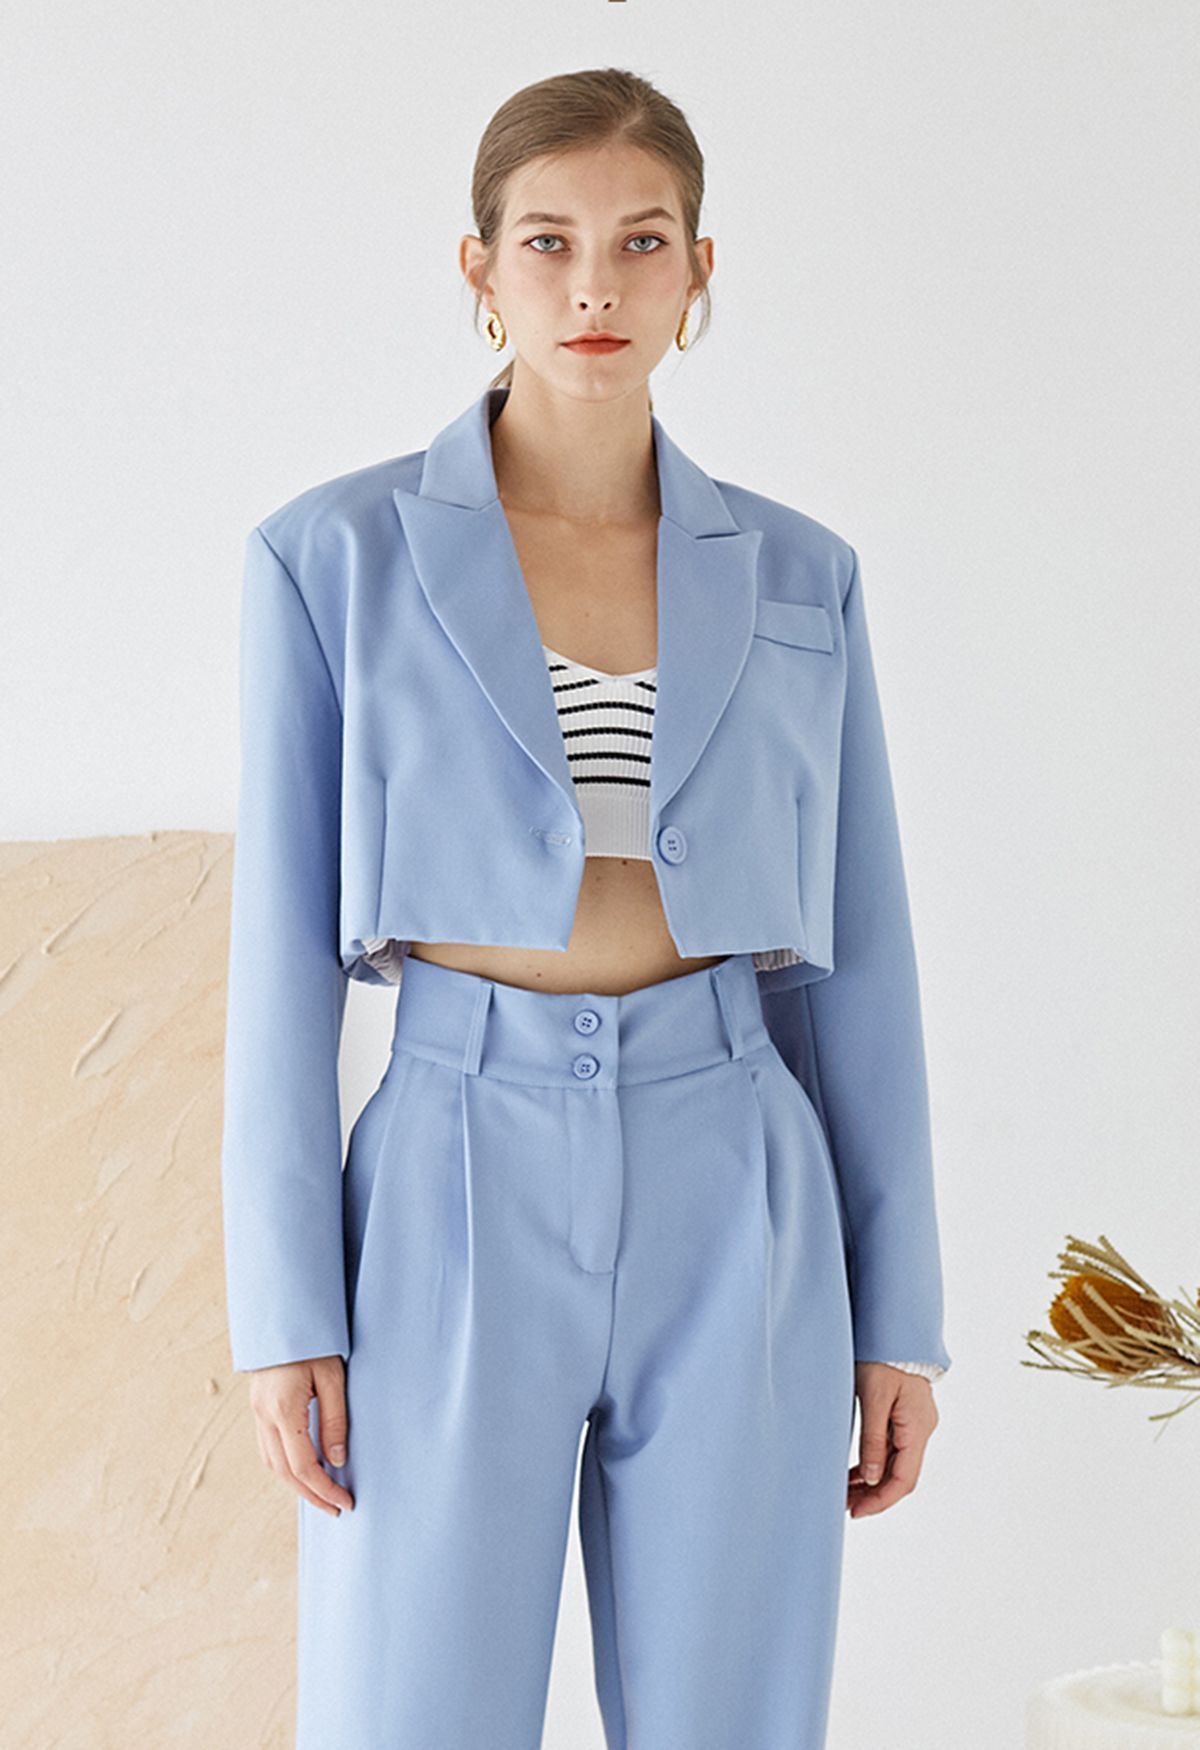 Fascinating Notch Lapel Cropped Blazer in Blue | Chicwish